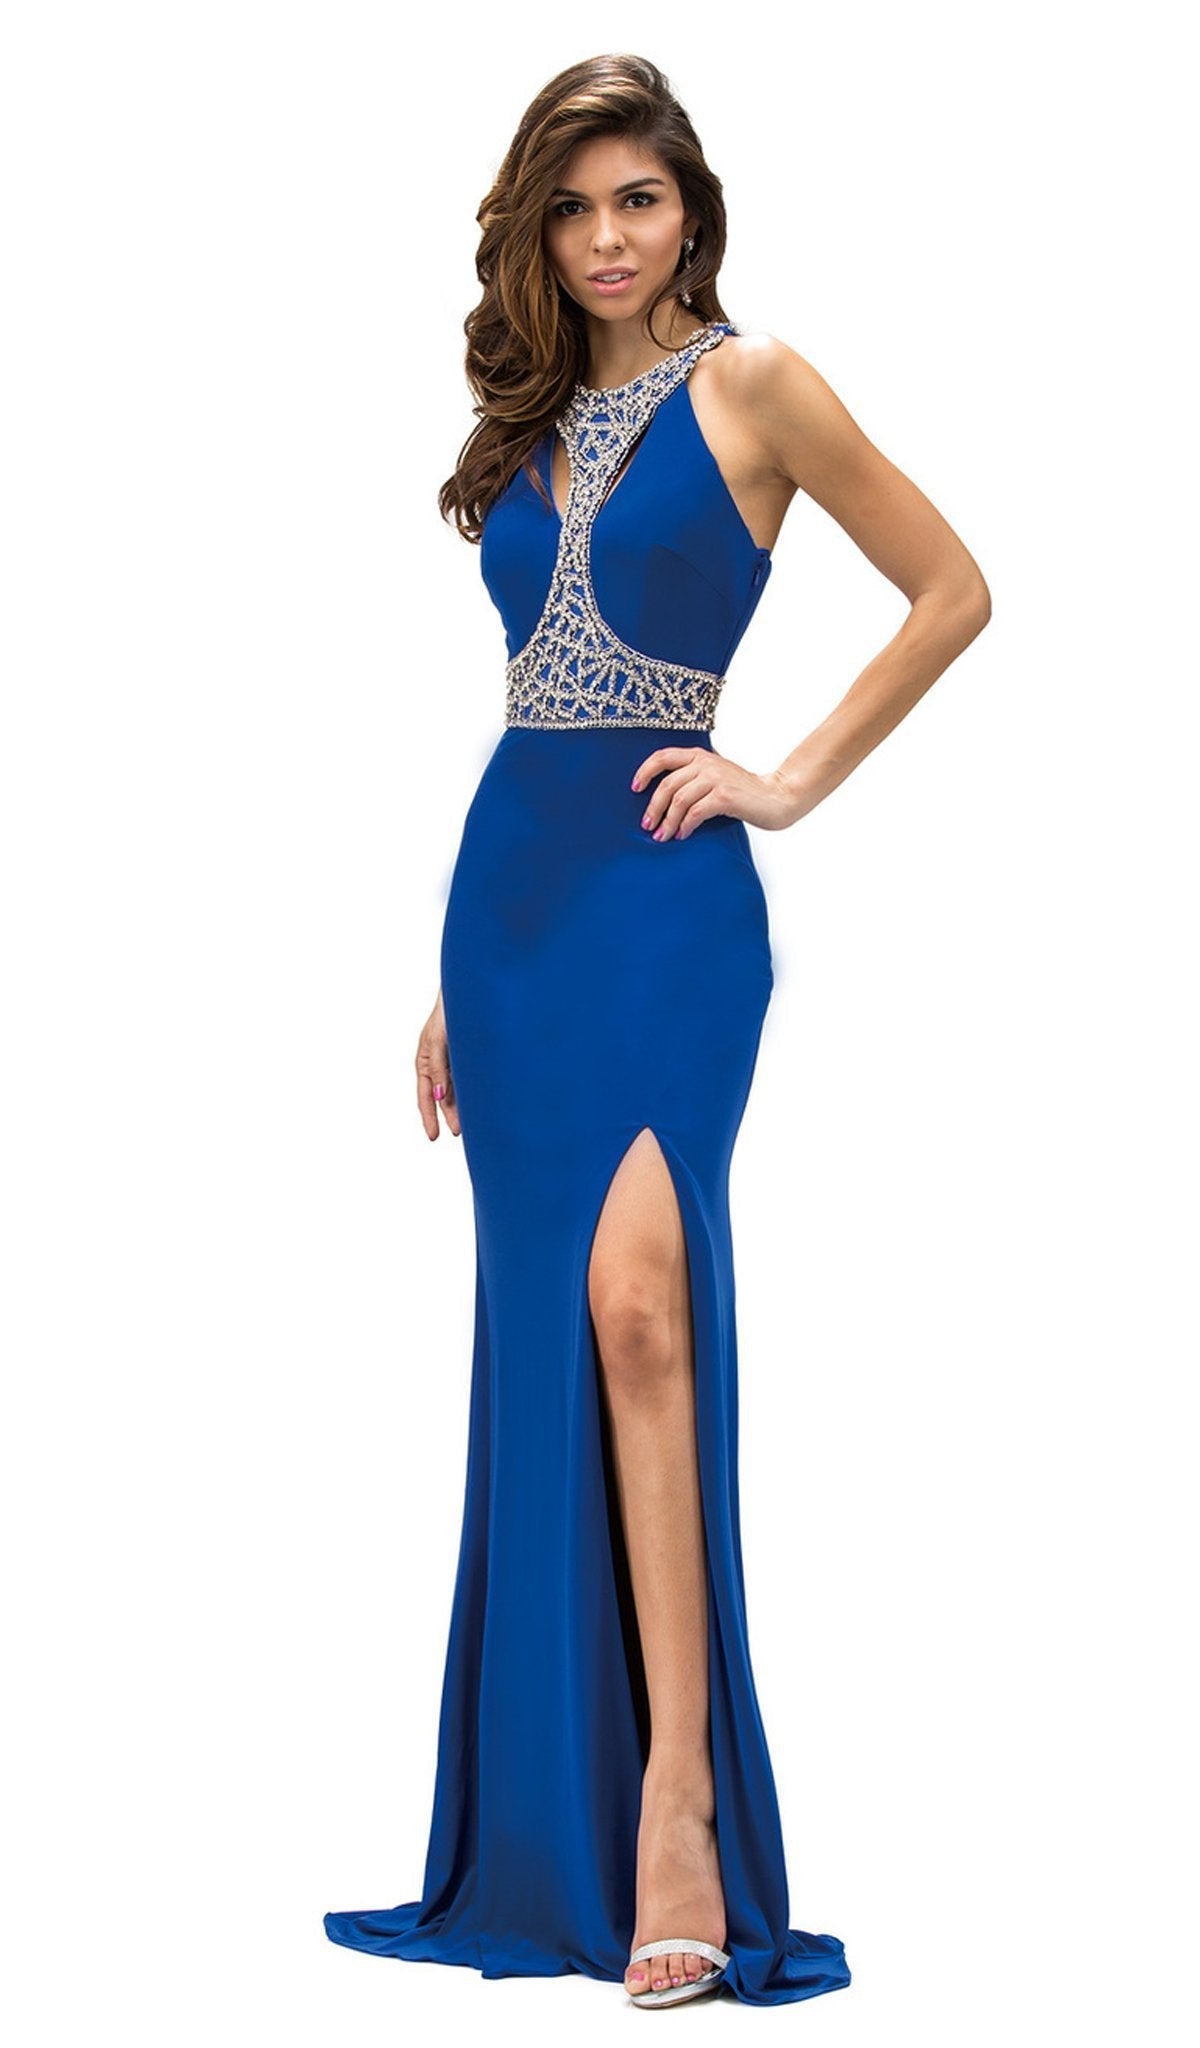 Dancing Queen - 9285 Sculpted Jewel-Encrusted High Slit Prom Dress Special Occasion Dress XS / Royal Blue